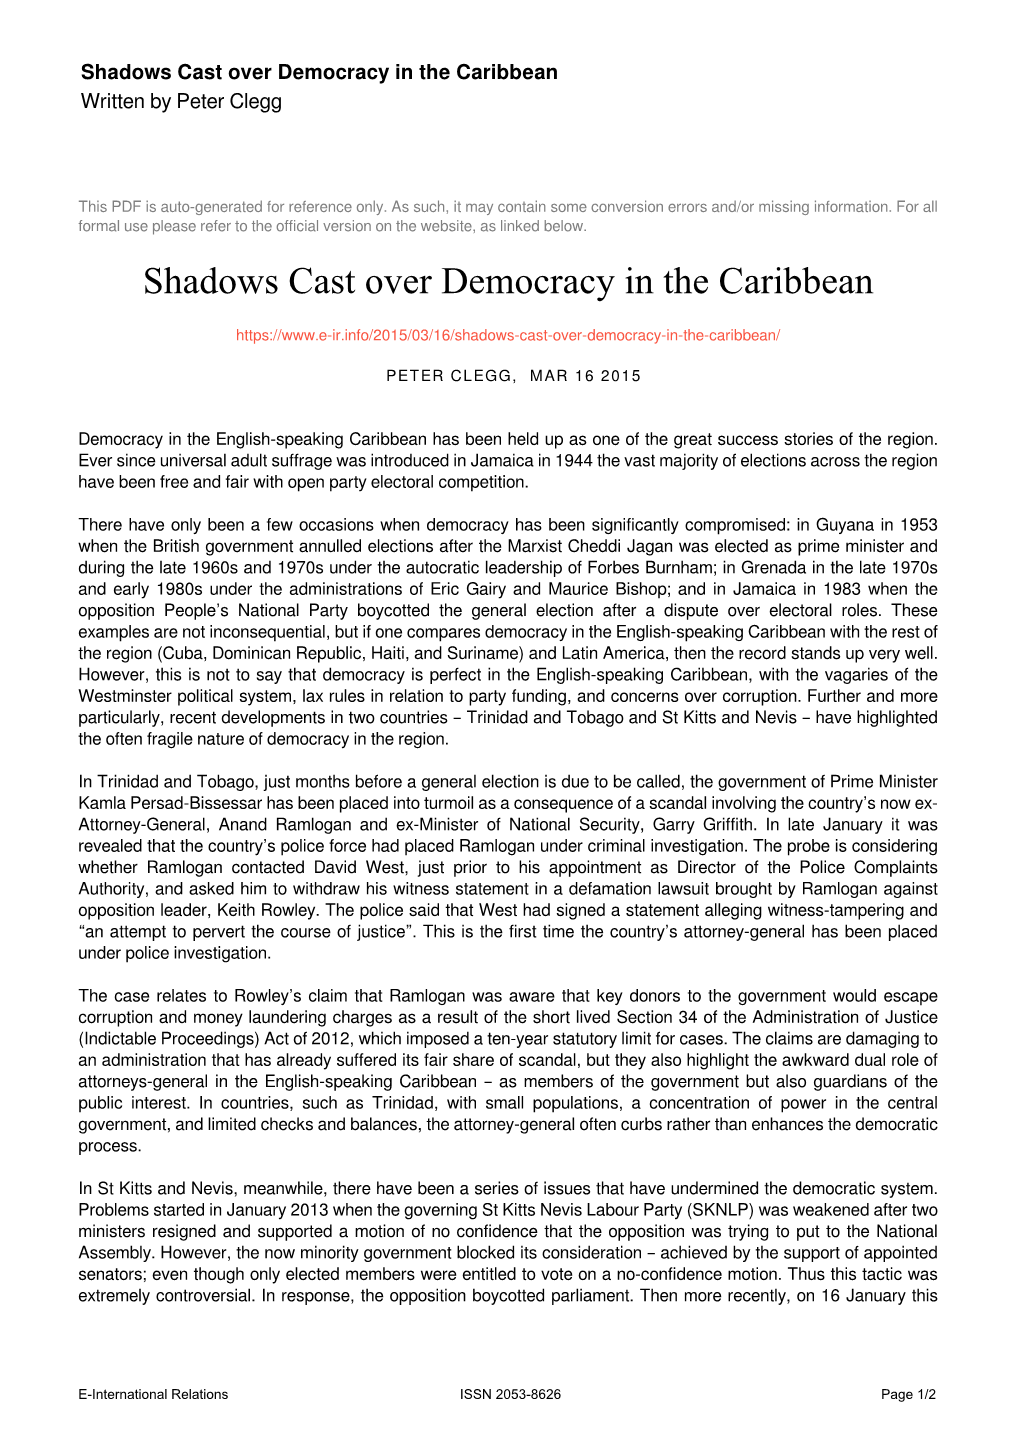 Shadows Cast Over Democracy in the Caribbean Written by Peter Clegg